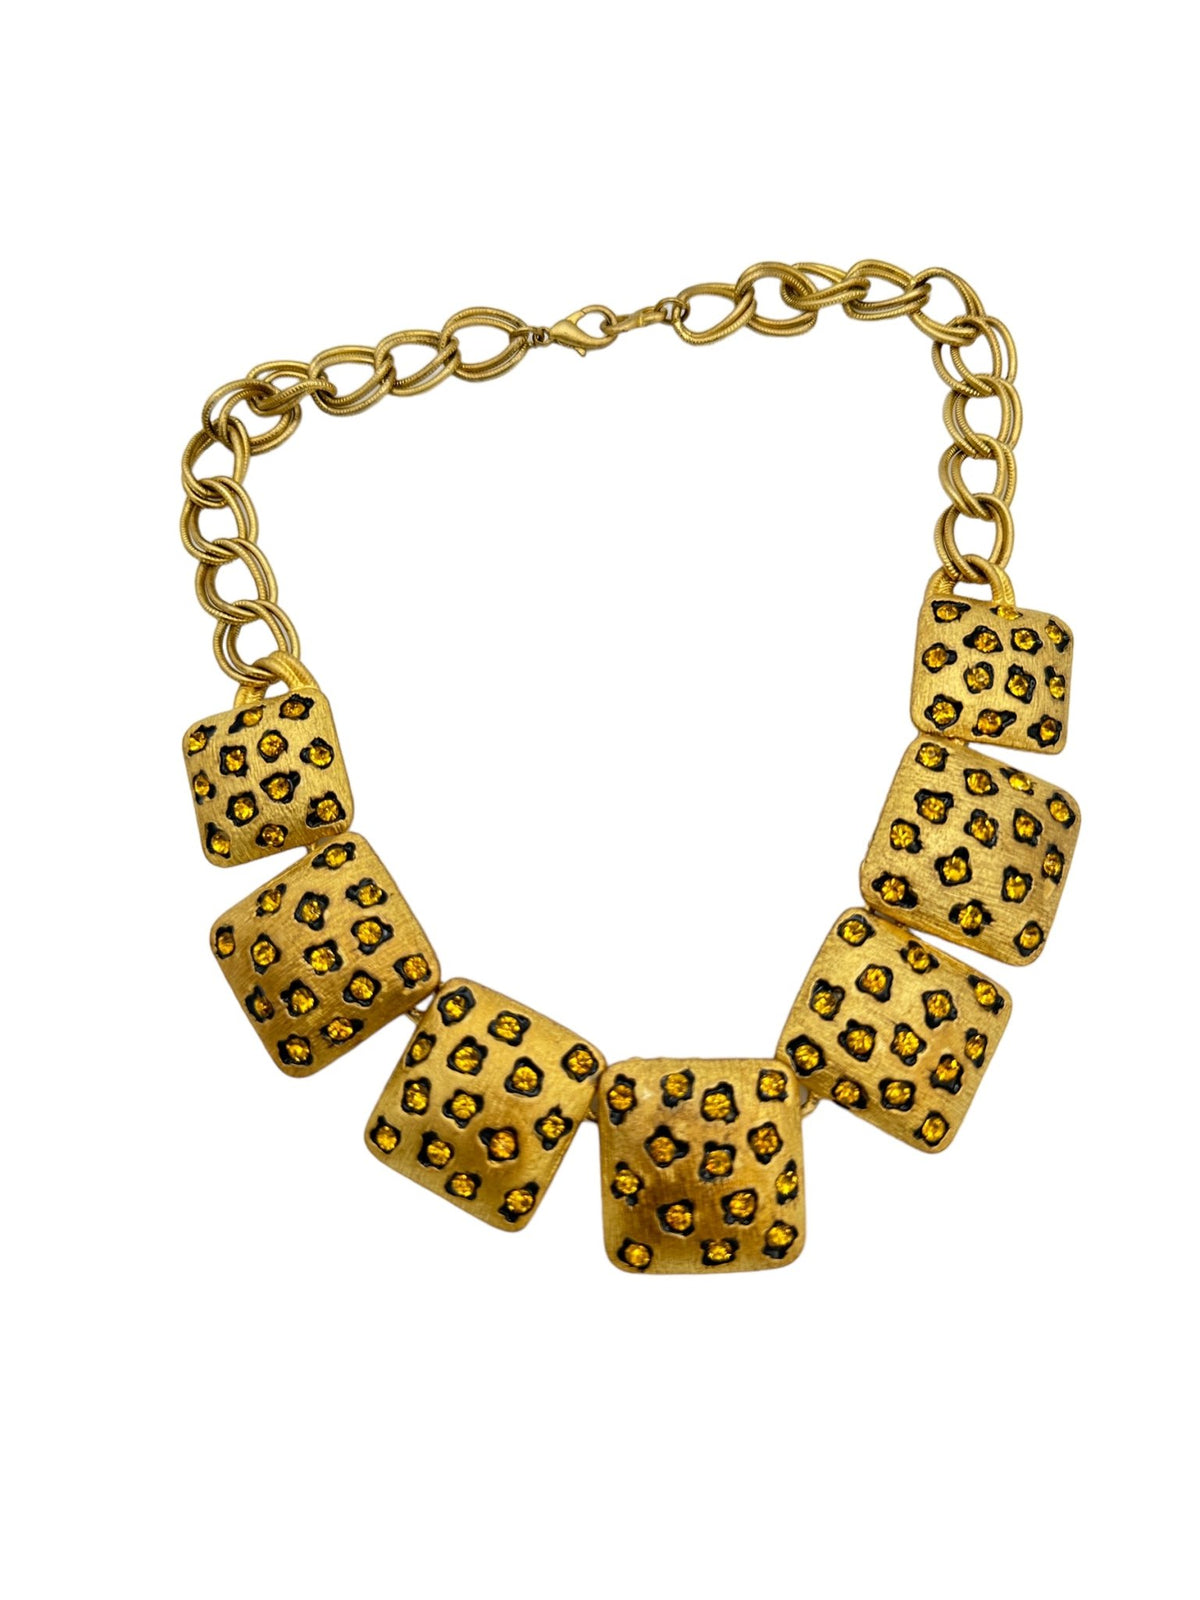 Gold Leopard Panel Necklace & Earring Golden Citrine Rhinestone Jewelry Set - 24 Wishes Vintage Jewelry